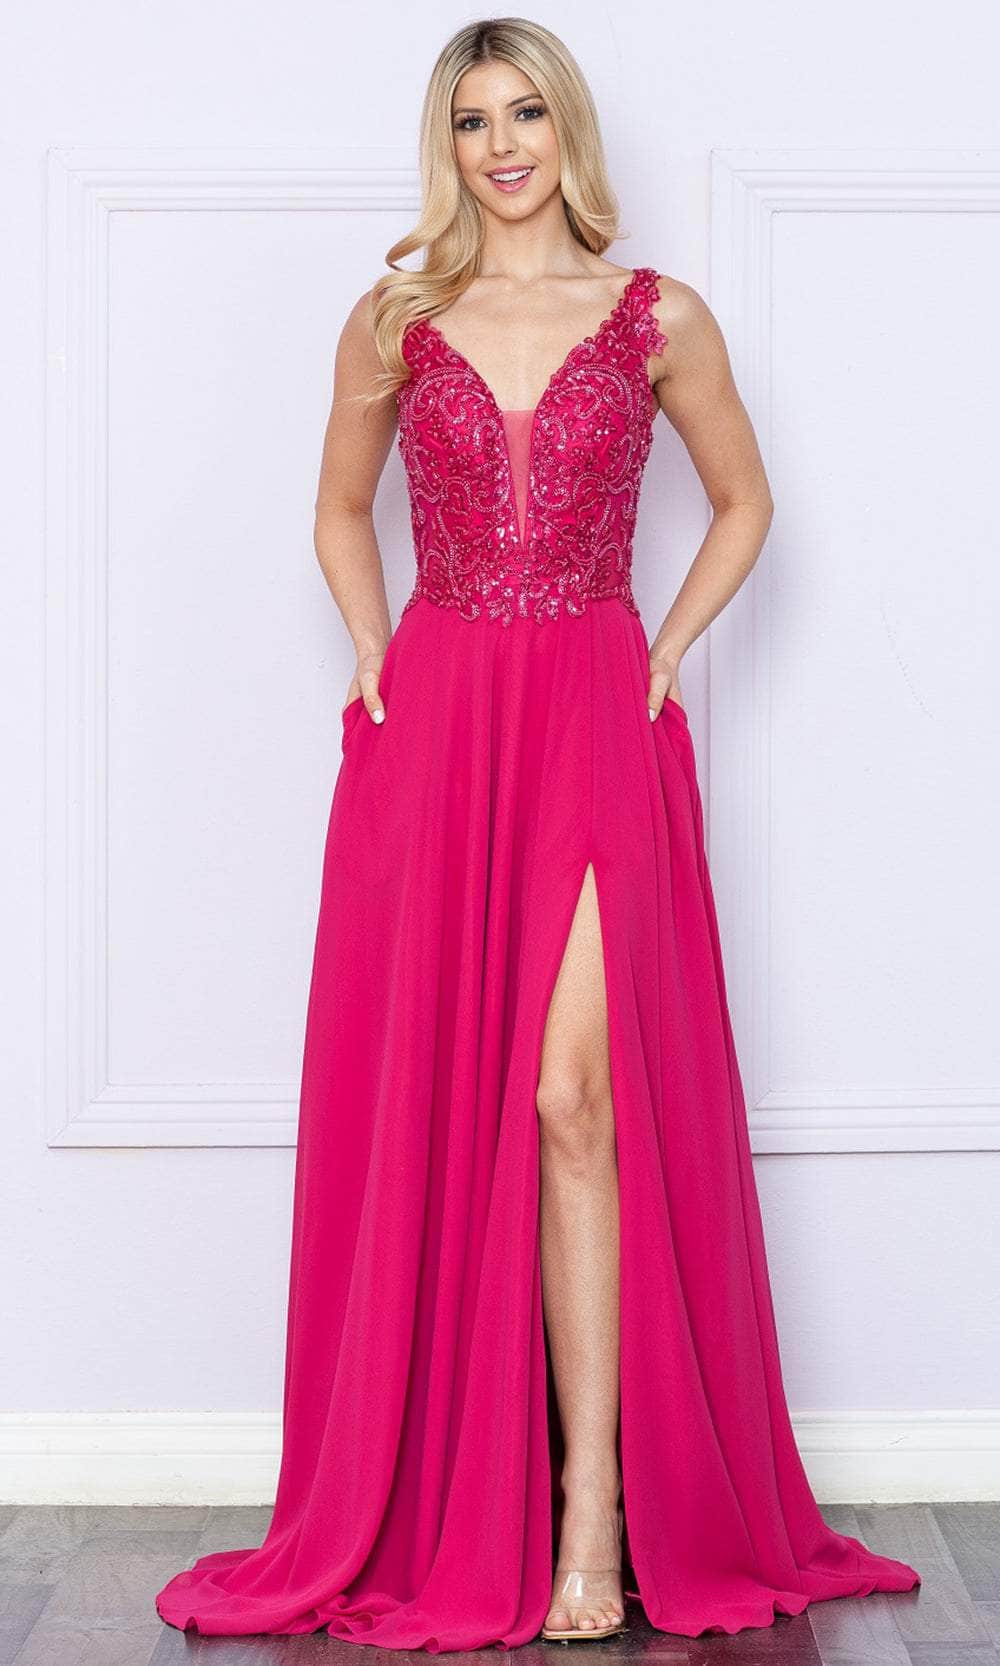 Image of Poly USA 9366 - Sequin Embroidered V-Neck Prom Dress